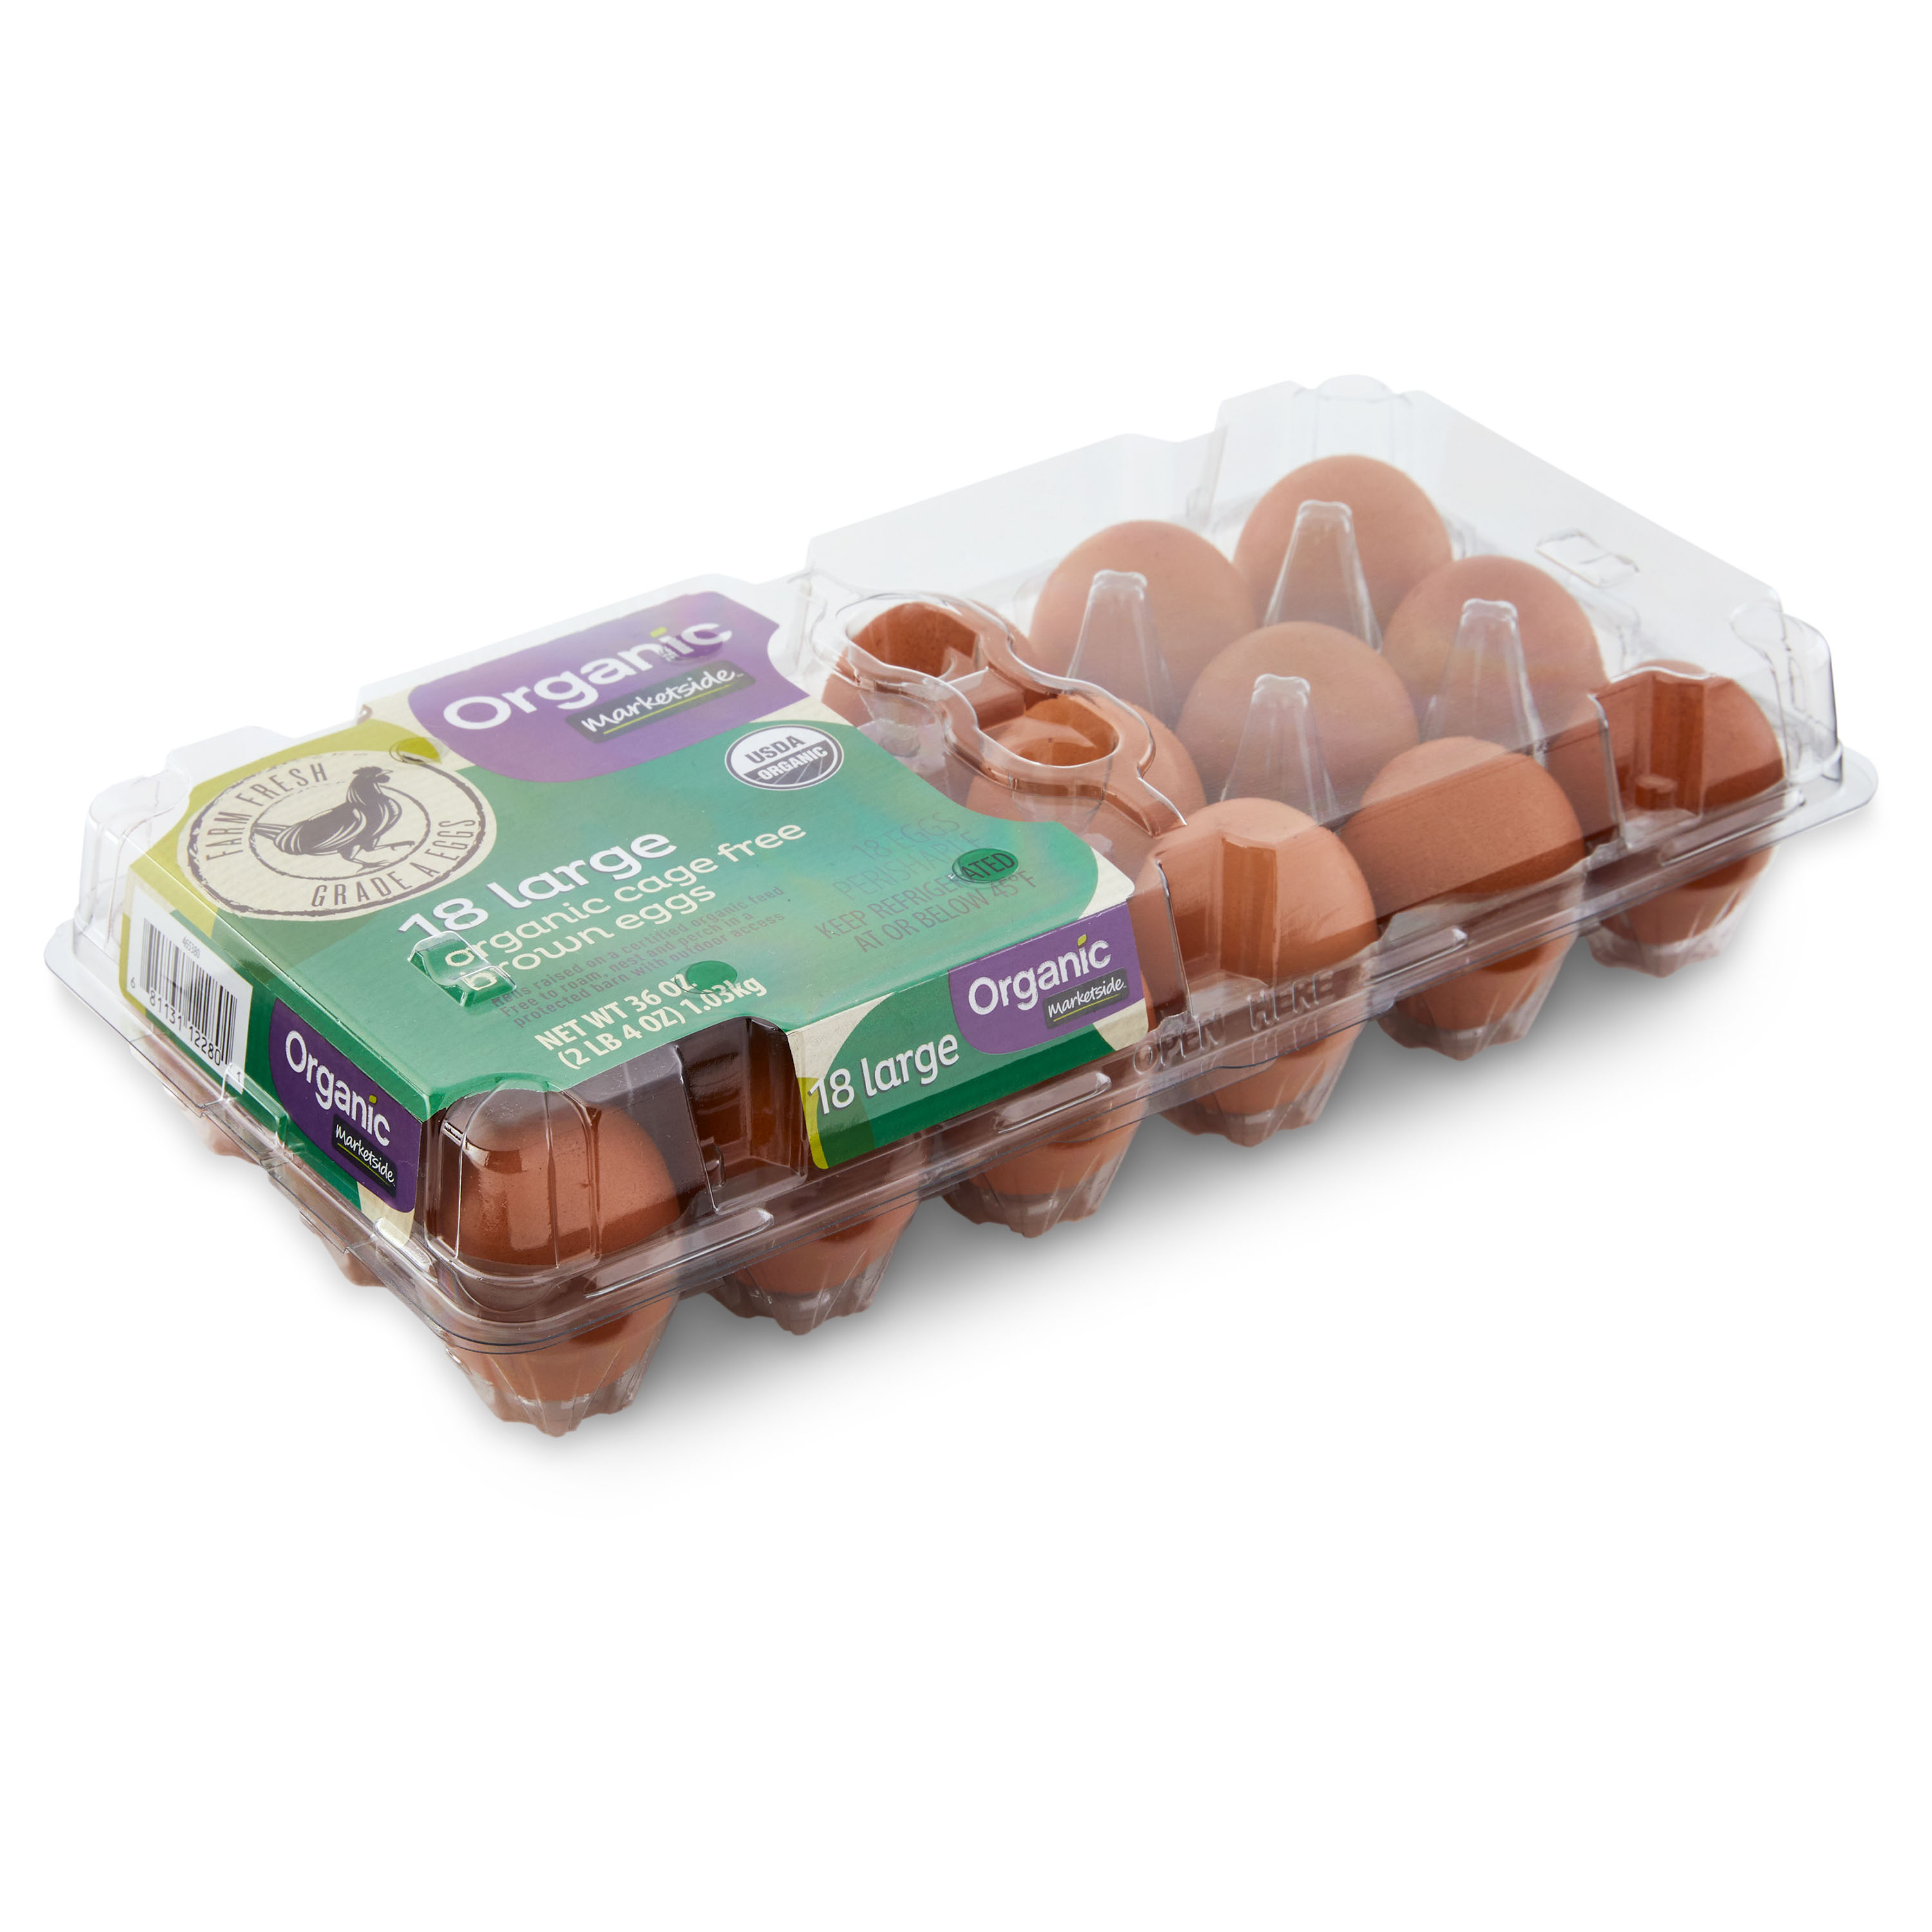 Marketside Organic Cage-Free Brown Large Eggs, 18 Count - image 1 of 6